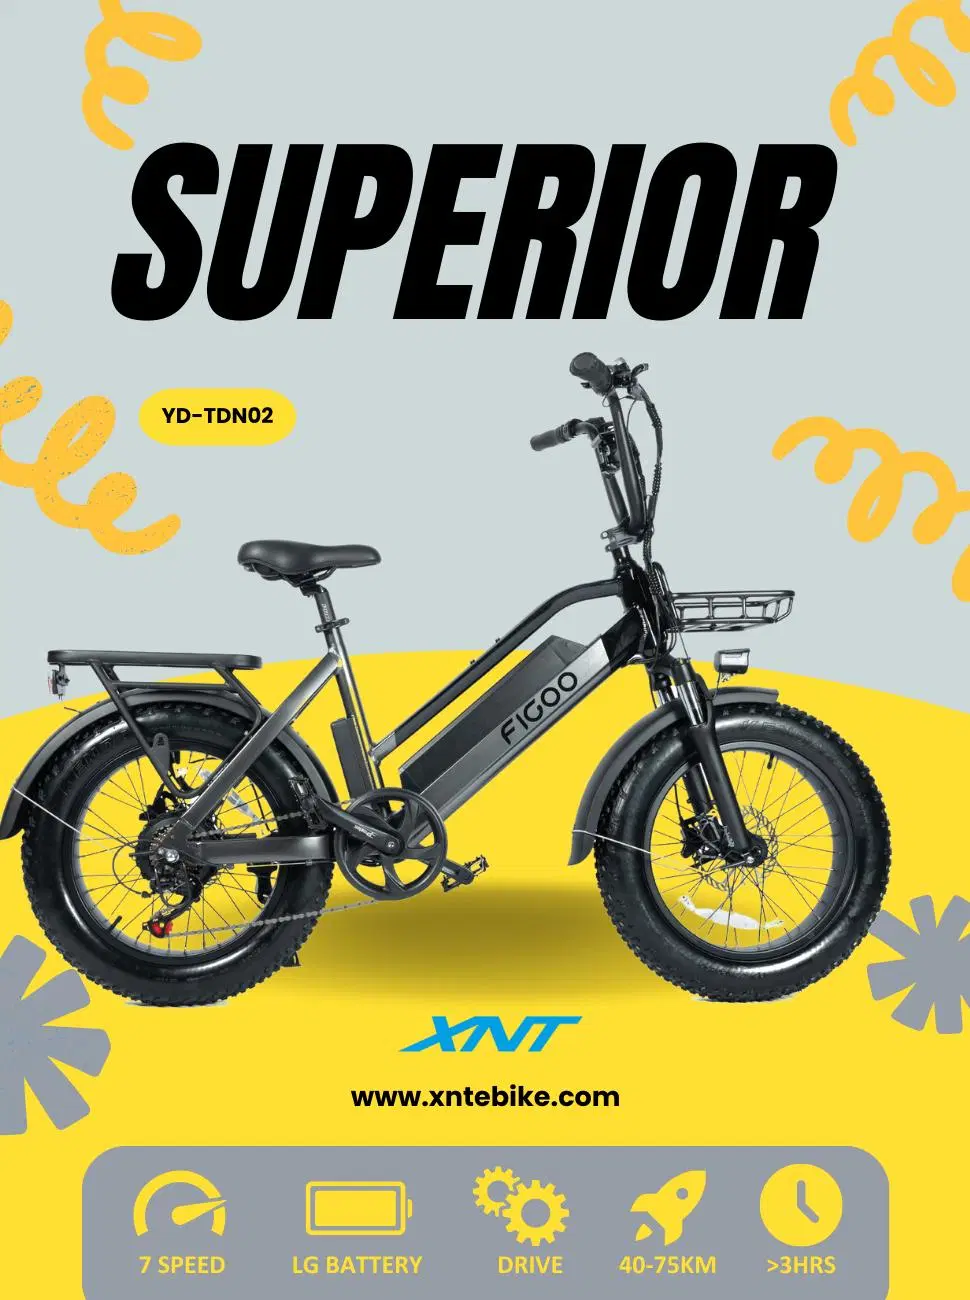 52V 750W 20inch Fat Tire Electric Most Strong and Powerful Ebike